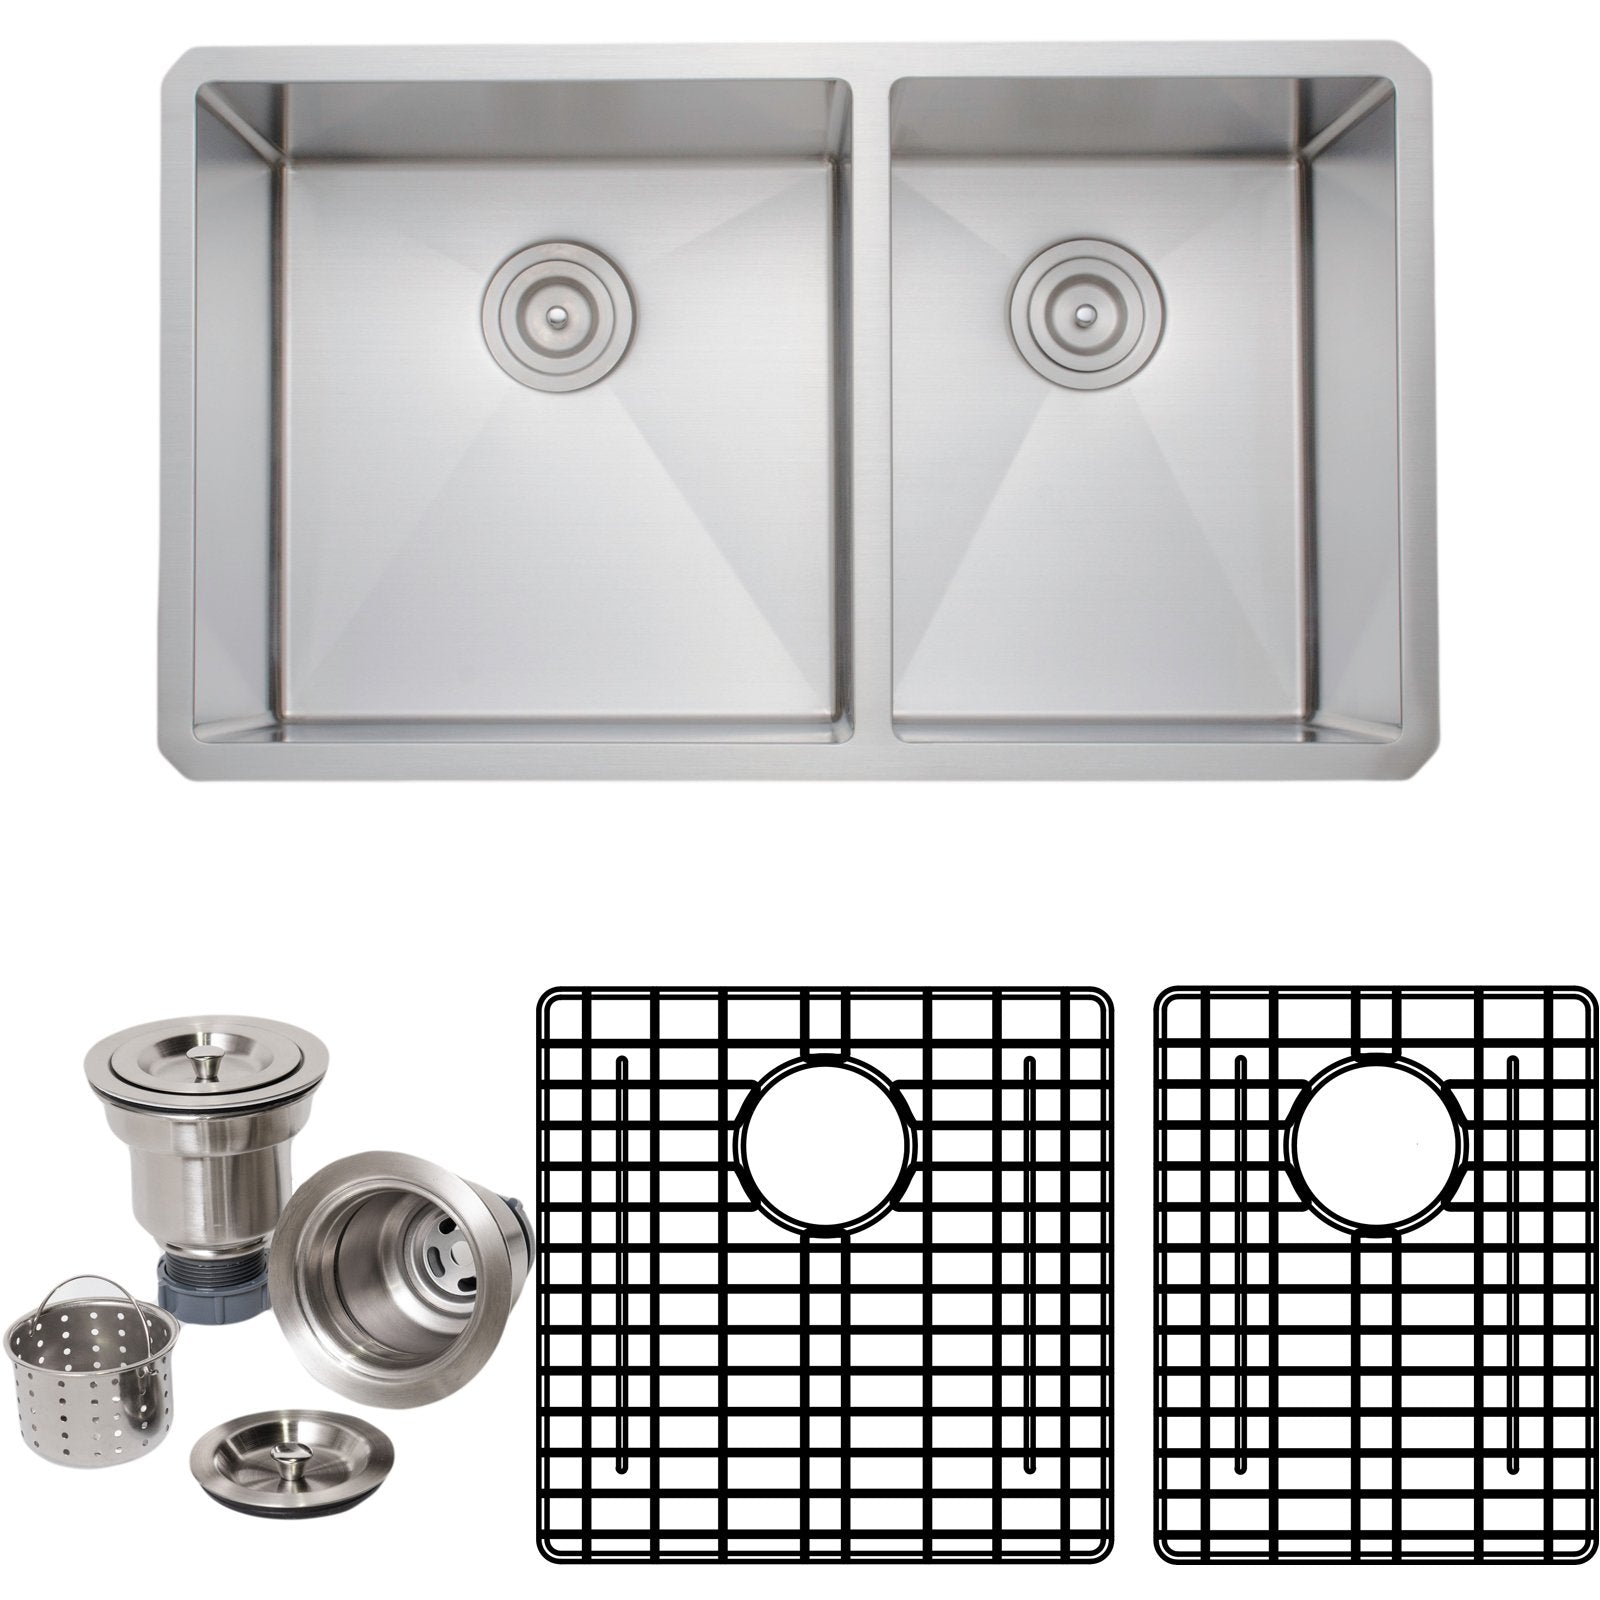 Wells Sinkware Handcrafted 33-Inch 16-Gauge Undermount 60/40 Double Bowl Stainless Steel Kitchen Sink with Grid Racks and Basket Strainers-DirectSinks